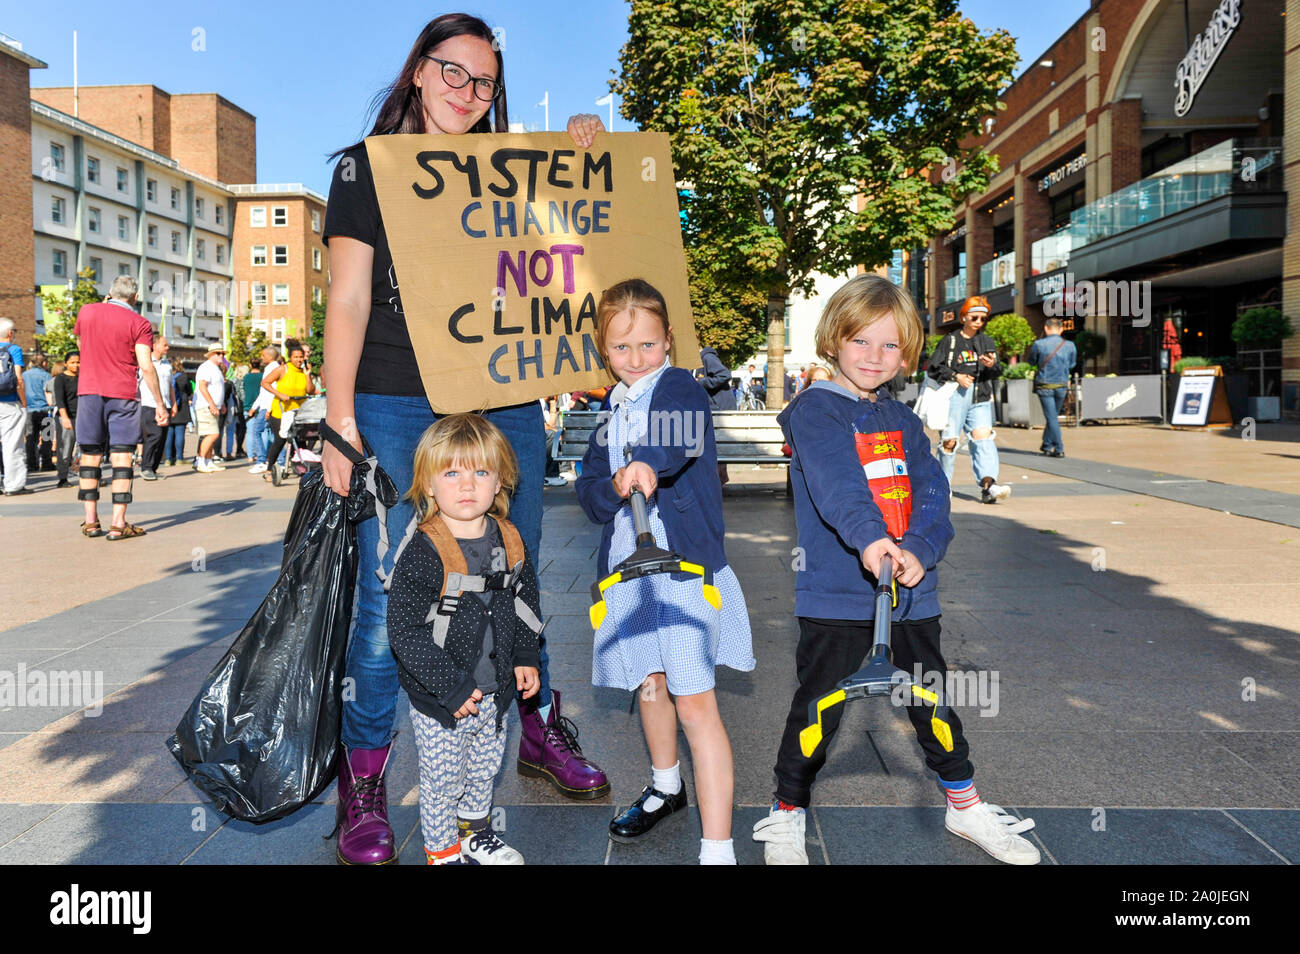 Coventry, West Midlands, UK. 20th Sept, 2019. Climate strikers gathered in their droves in Coventry this afternoon to protest against climate change. The climate strike, organised by various trade unions, was part of a worldwide protest involving up to 400,000 people. Credit: Andy Gibson/Alamy Live News. Stock Photo